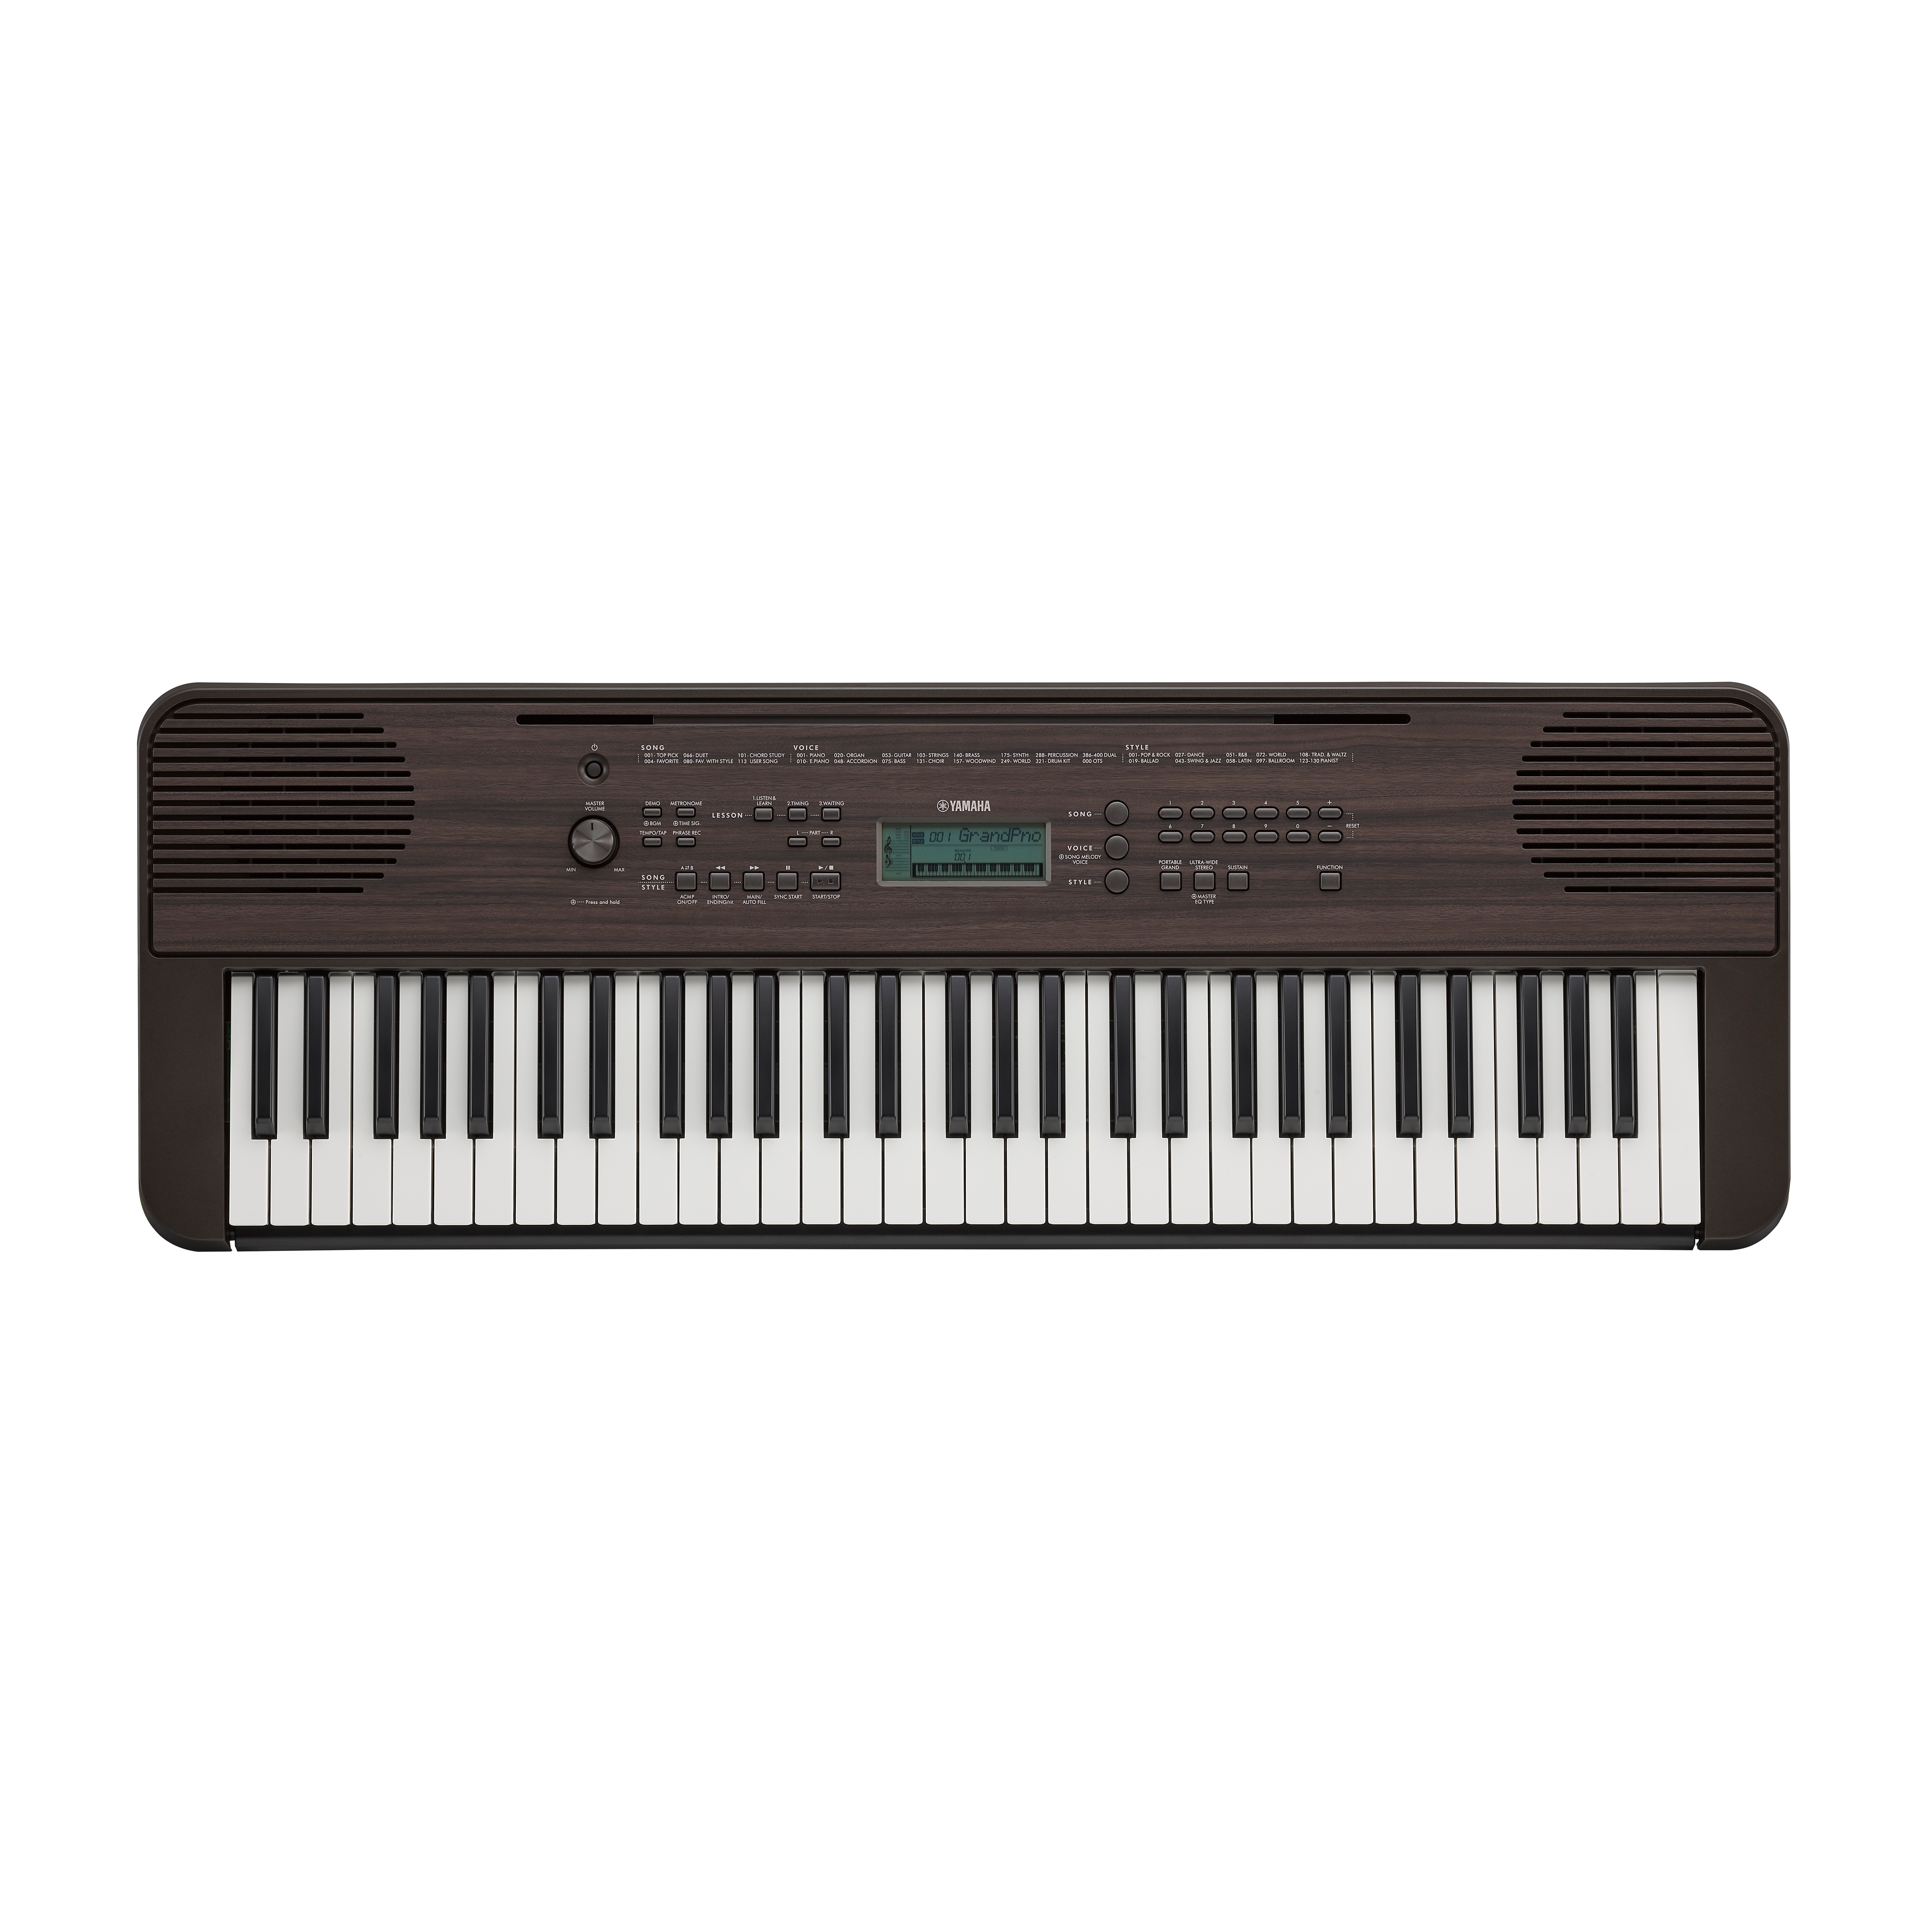 PSR-E360 - Overview - Portable Keyboards - Keyboard Instruments 